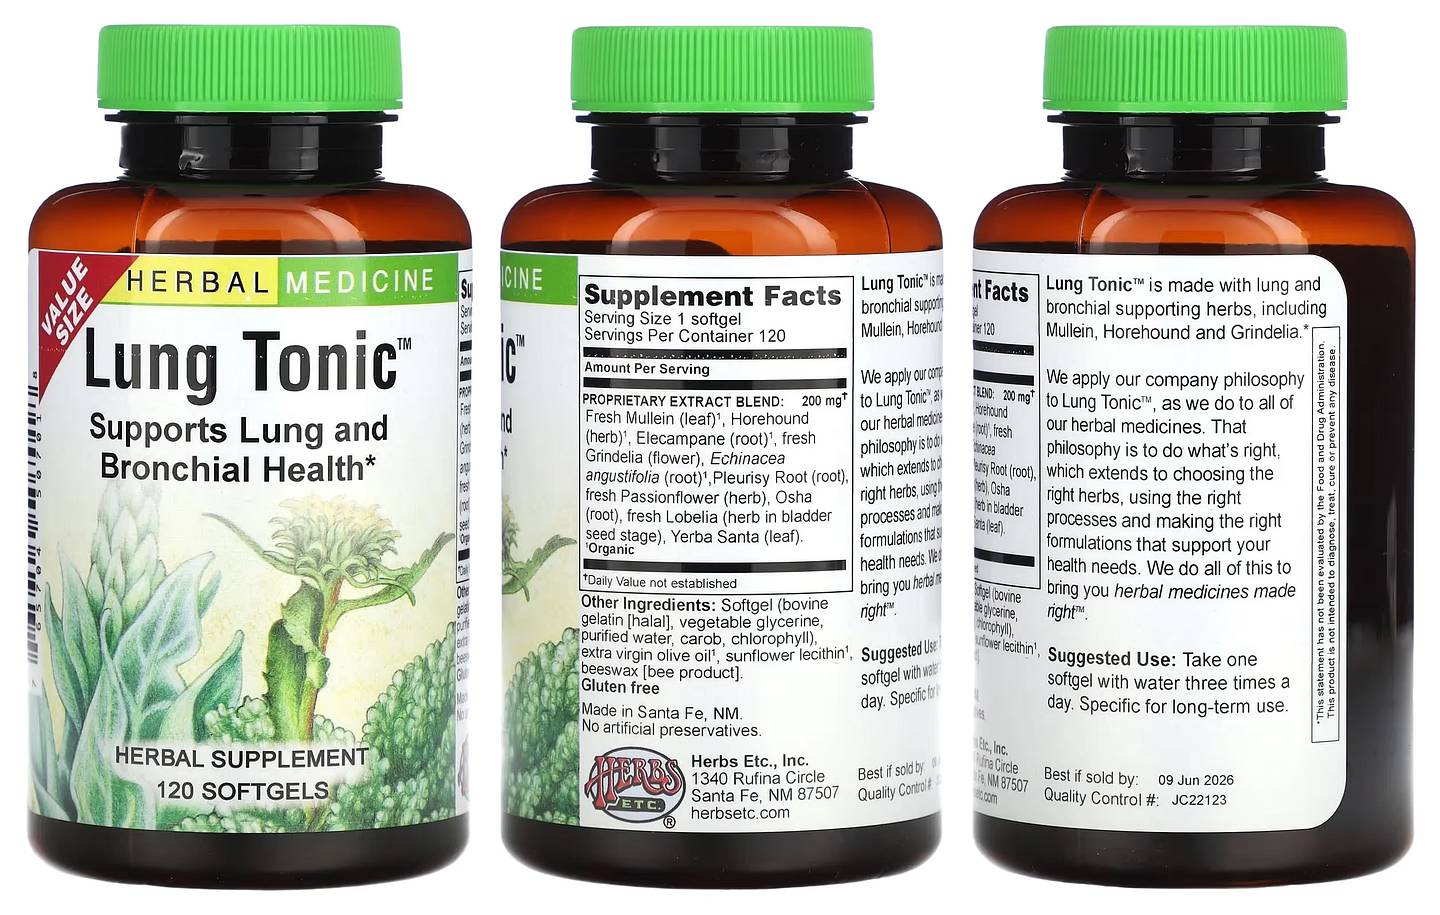 Herbs Etc, Lung Tonic packaging